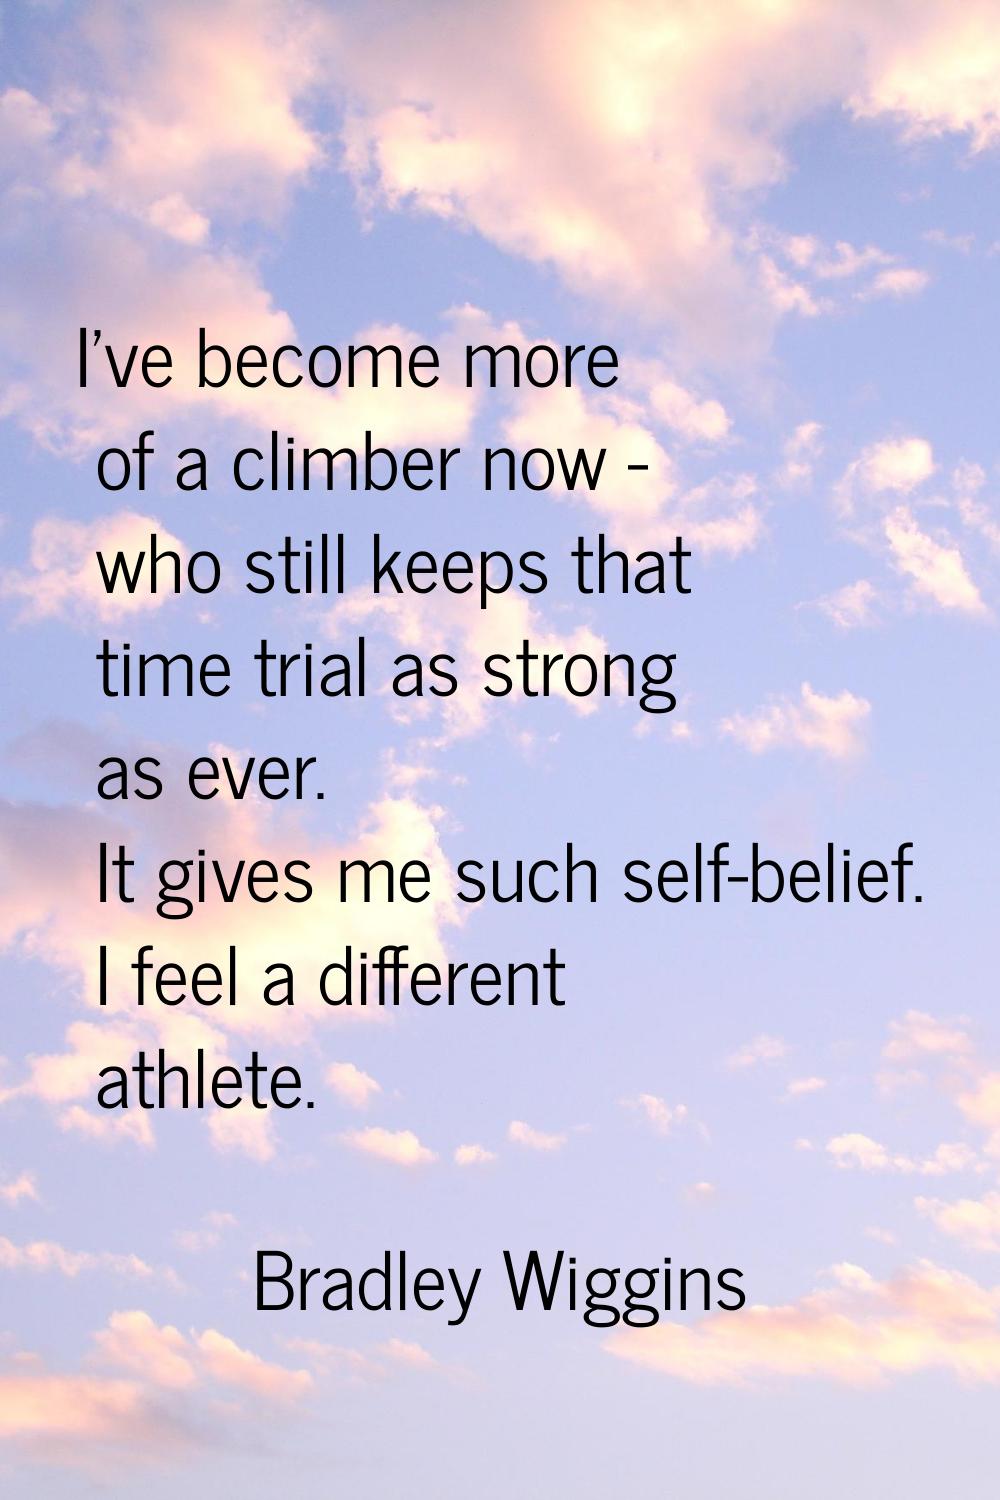 I've become more of a climber now - who still keeps that time trial as strong as ever. It gives me 